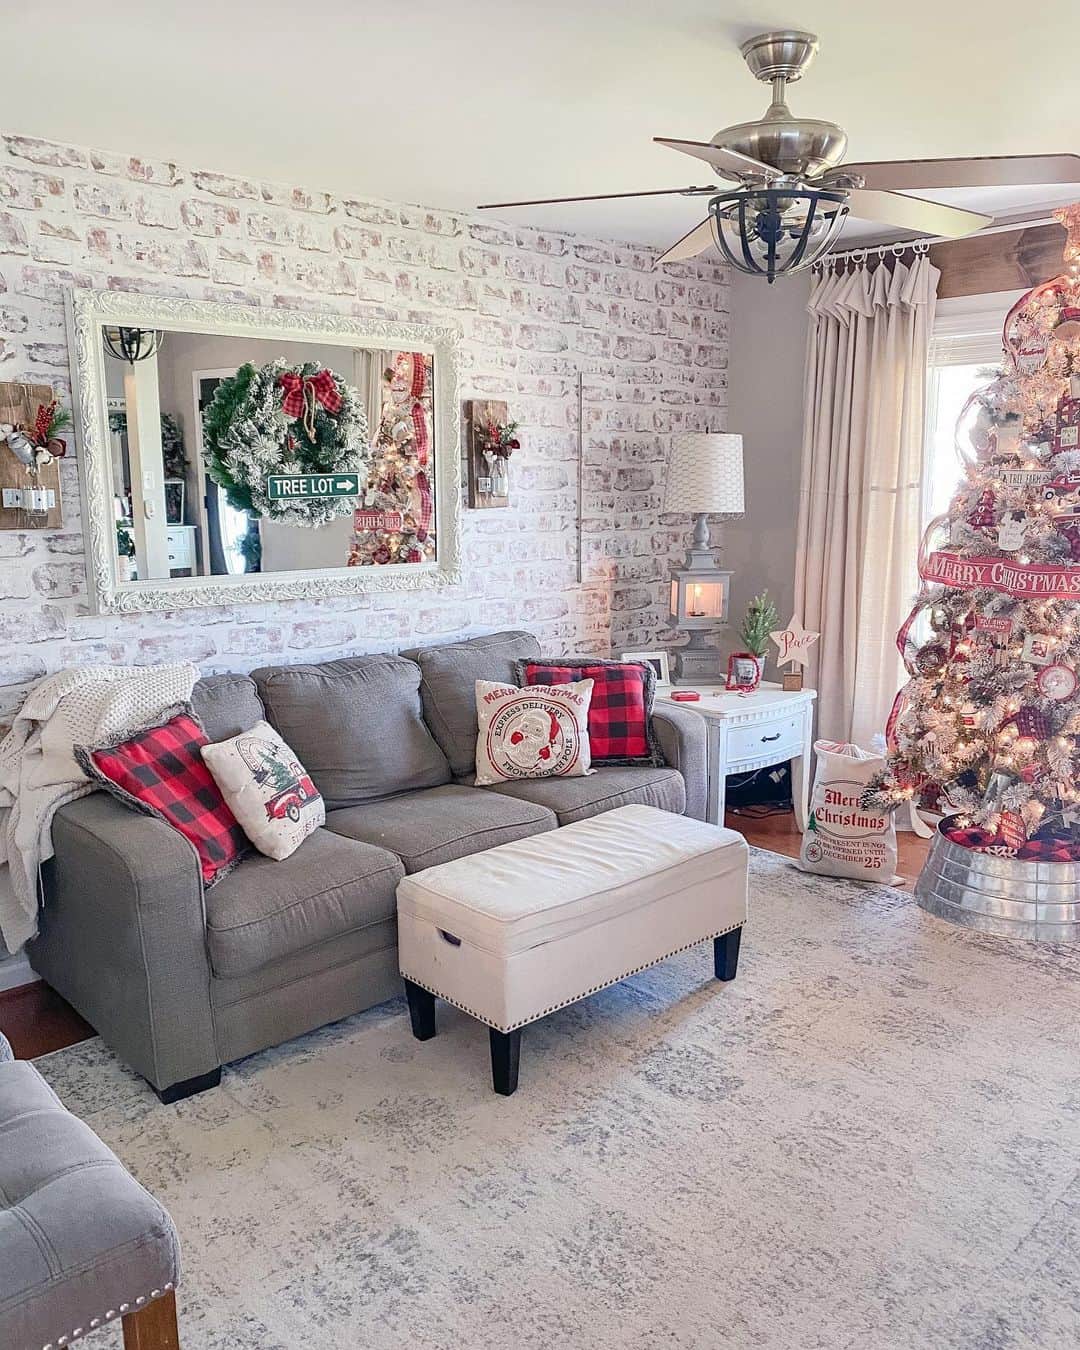 https://www.soulandlane.com/wp-content/uploads/2022/08/Grey-Couch-with-Christmas-Throw-Pillows.jpg